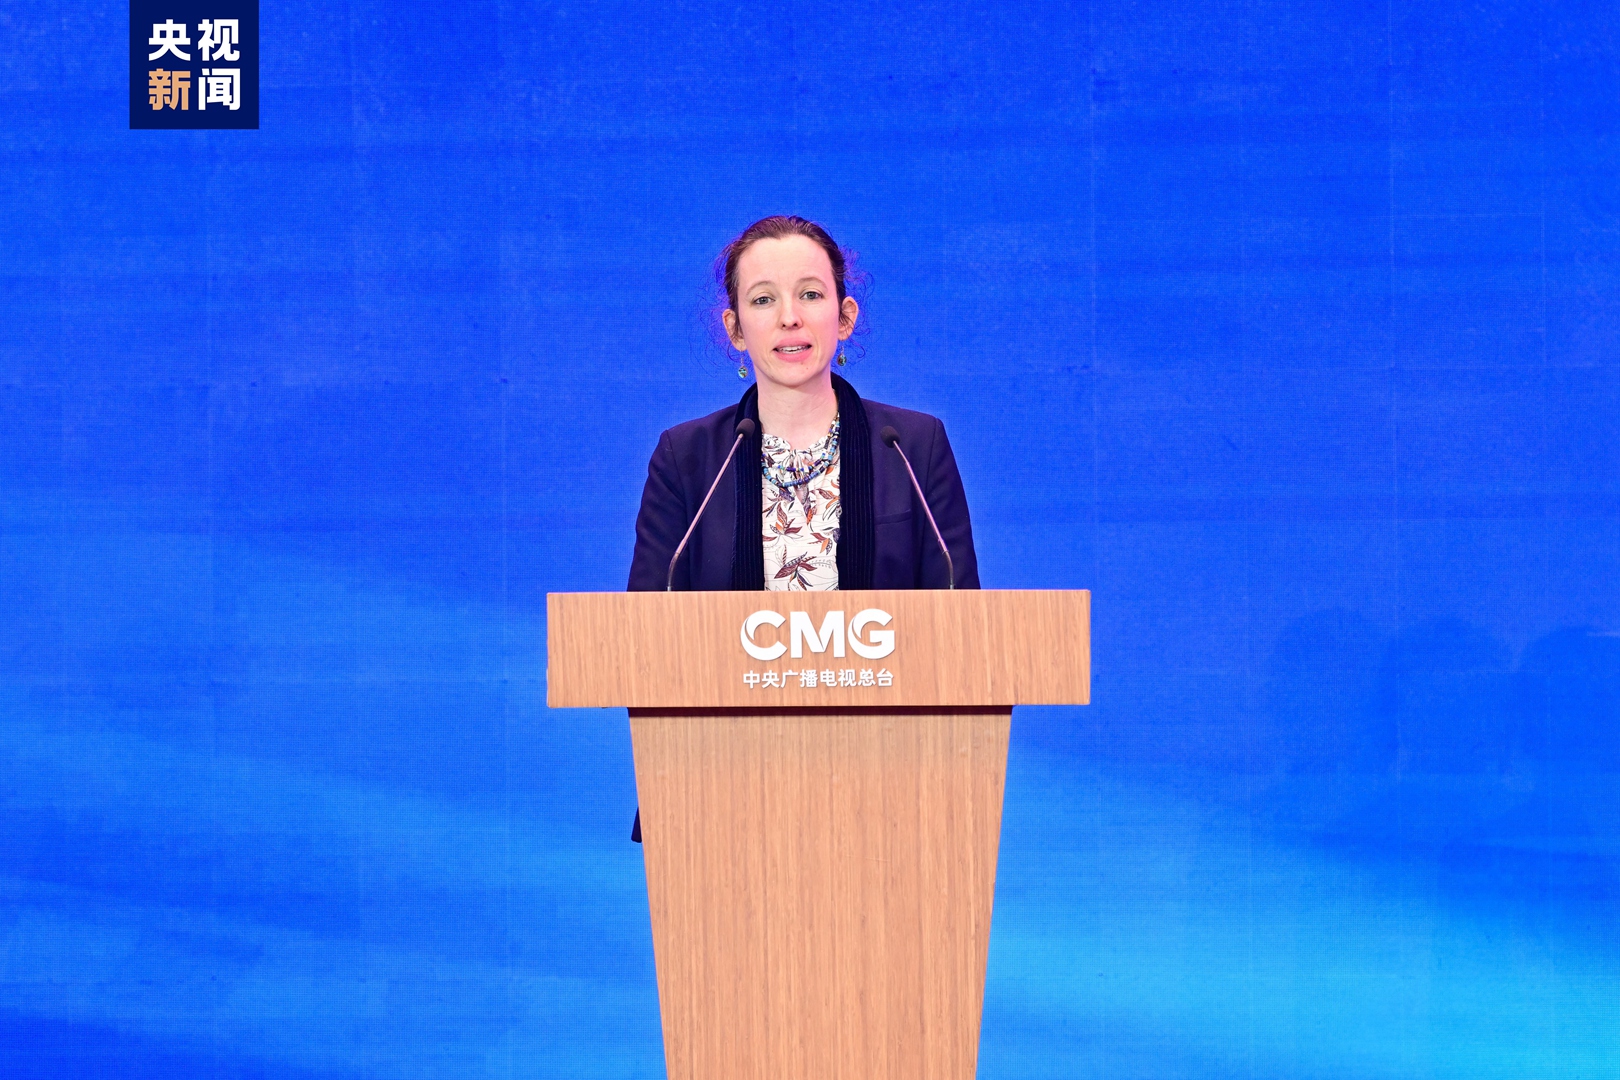 Myriam Pavageau, minister counselor of the French embassy in China, during the launch of the 14th Beijing International Film Festival (BJIFF) – French Film Week in Beijing, April 11, 2024. /CMG